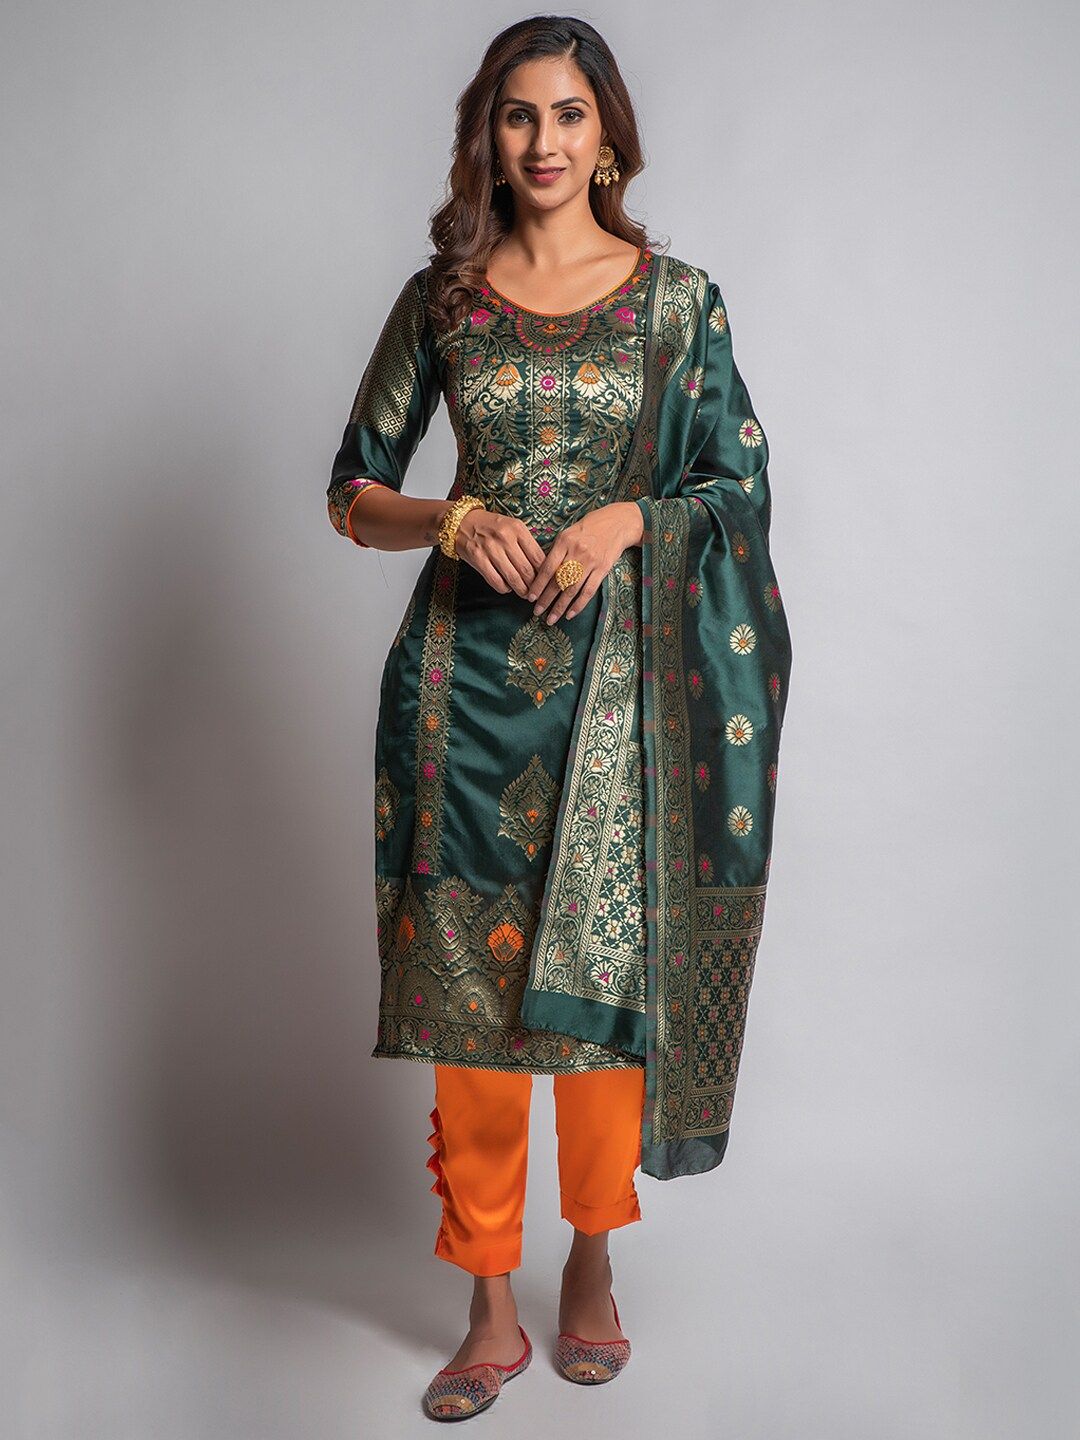 Lilots Green & Orange Unstitched Dress Material Price in India